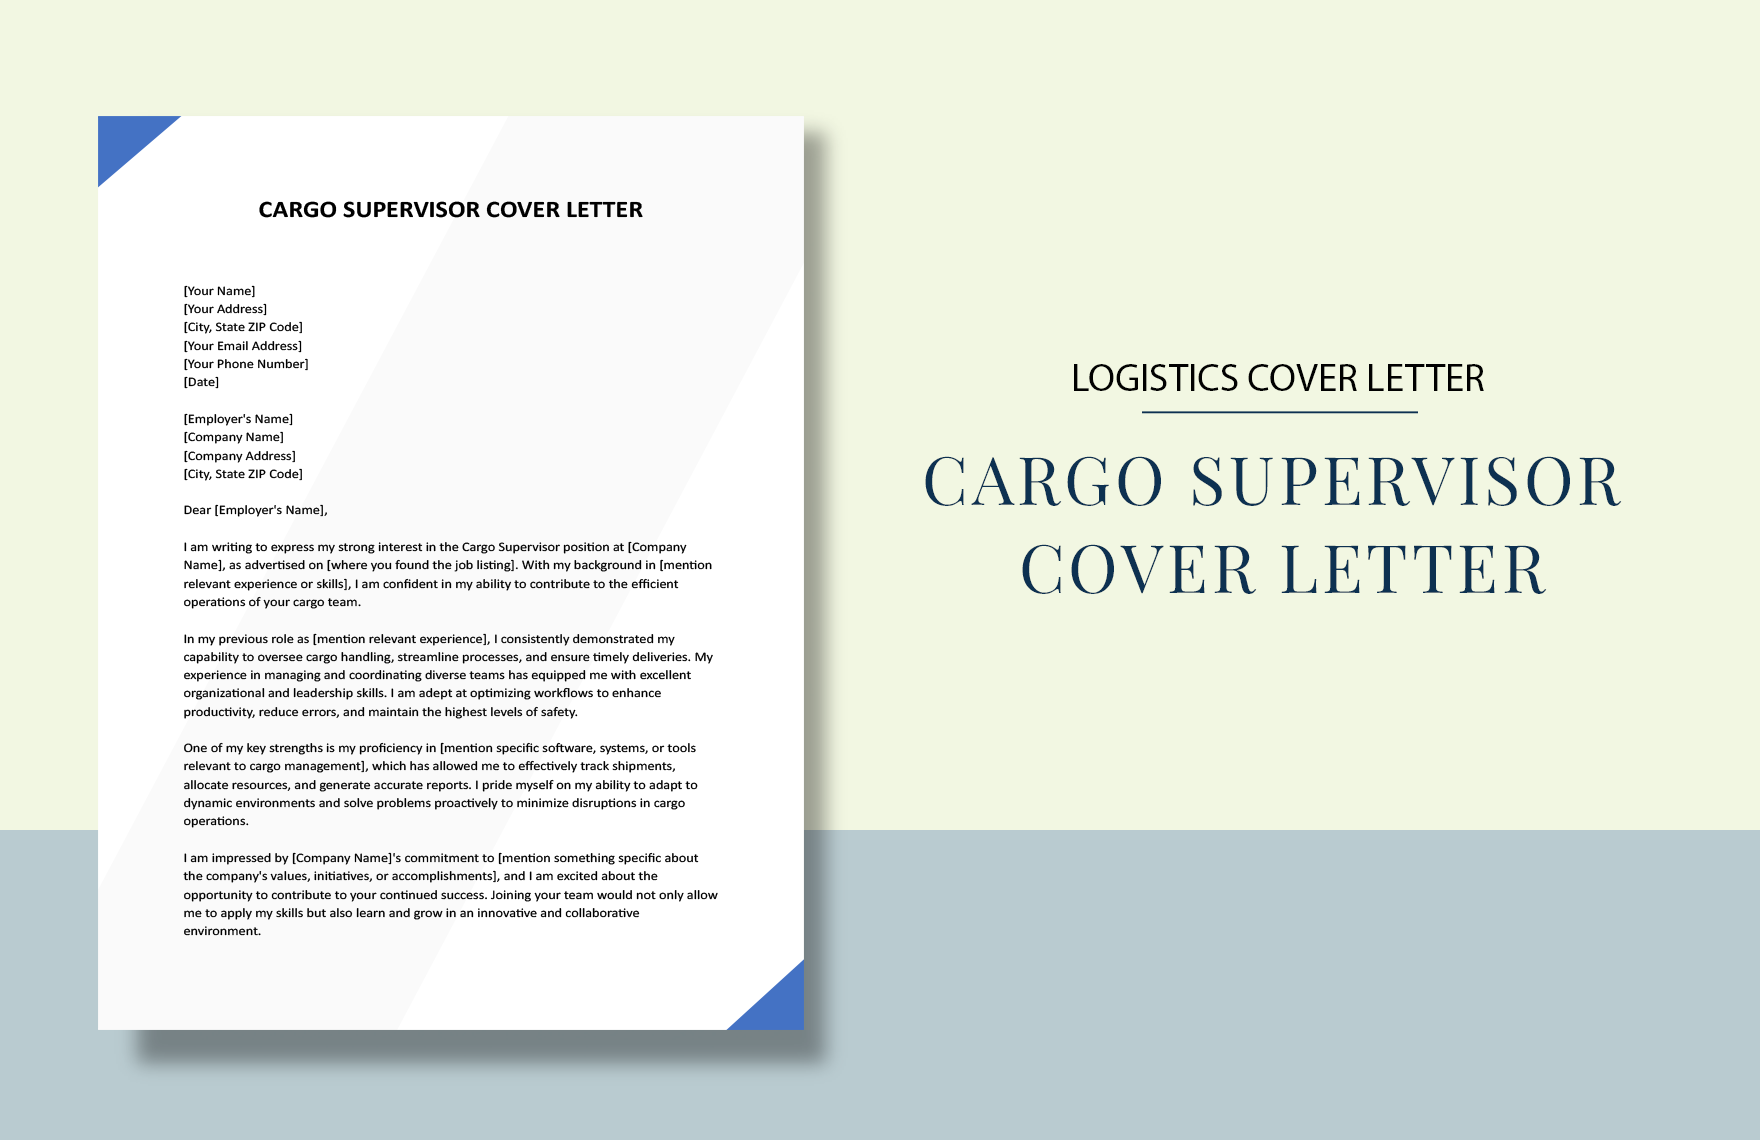 Cargo Supervisor Cover Letter in Word, Google Docs, Apple Pages